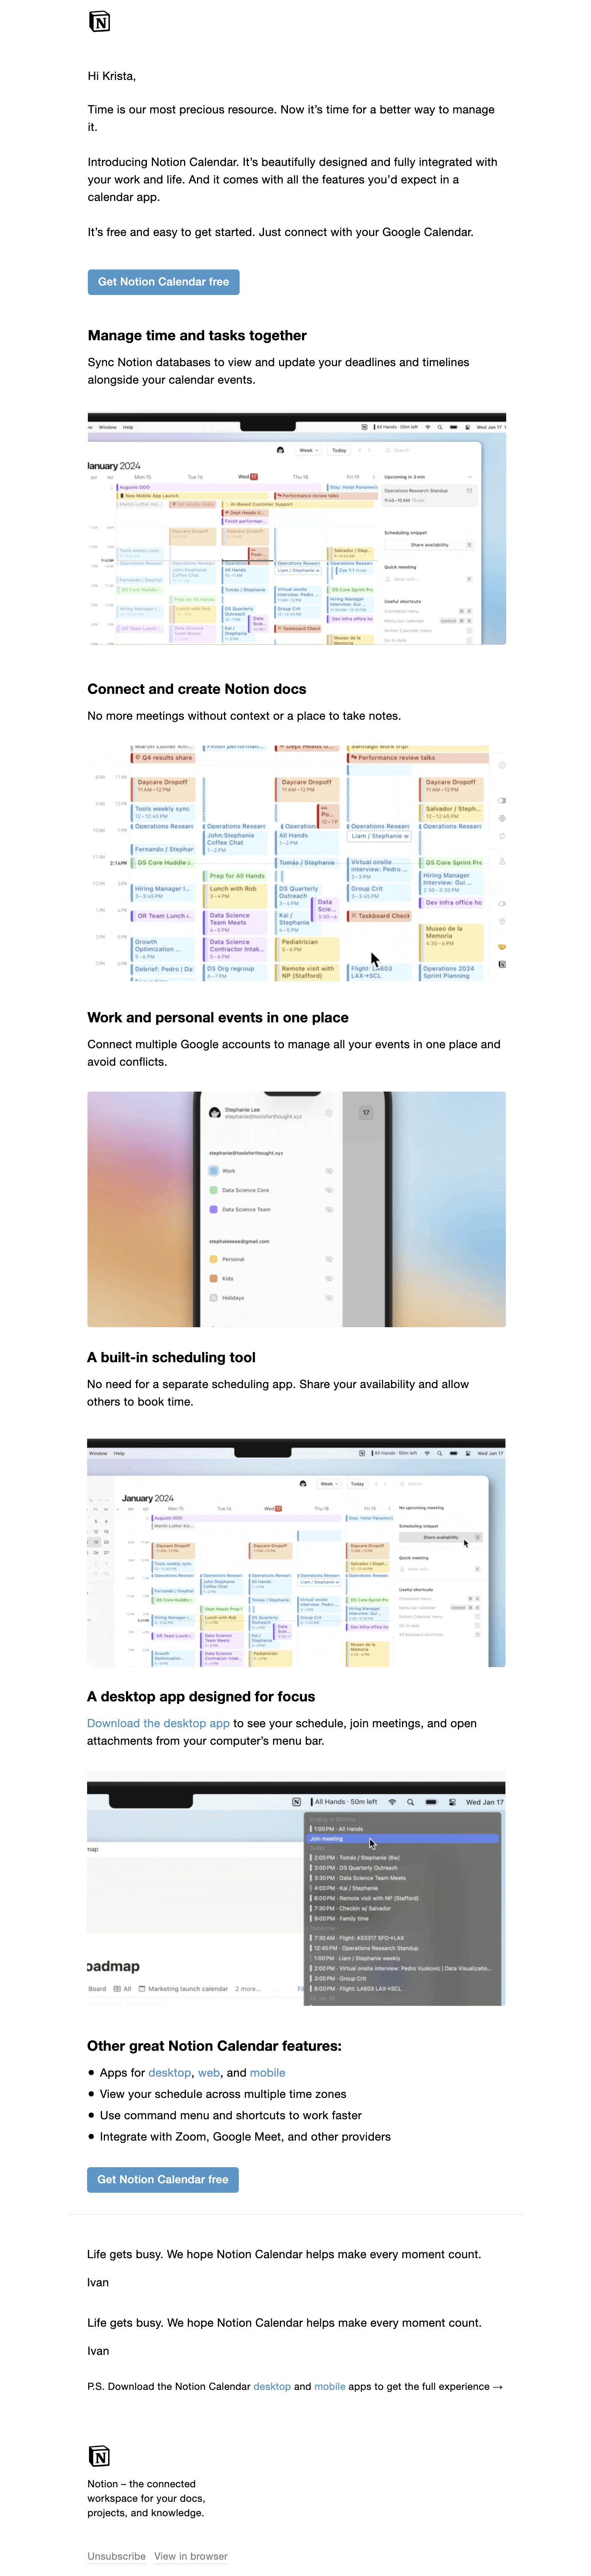 GIFs in SaaS Emails: Screenshot of Notion's product launch email